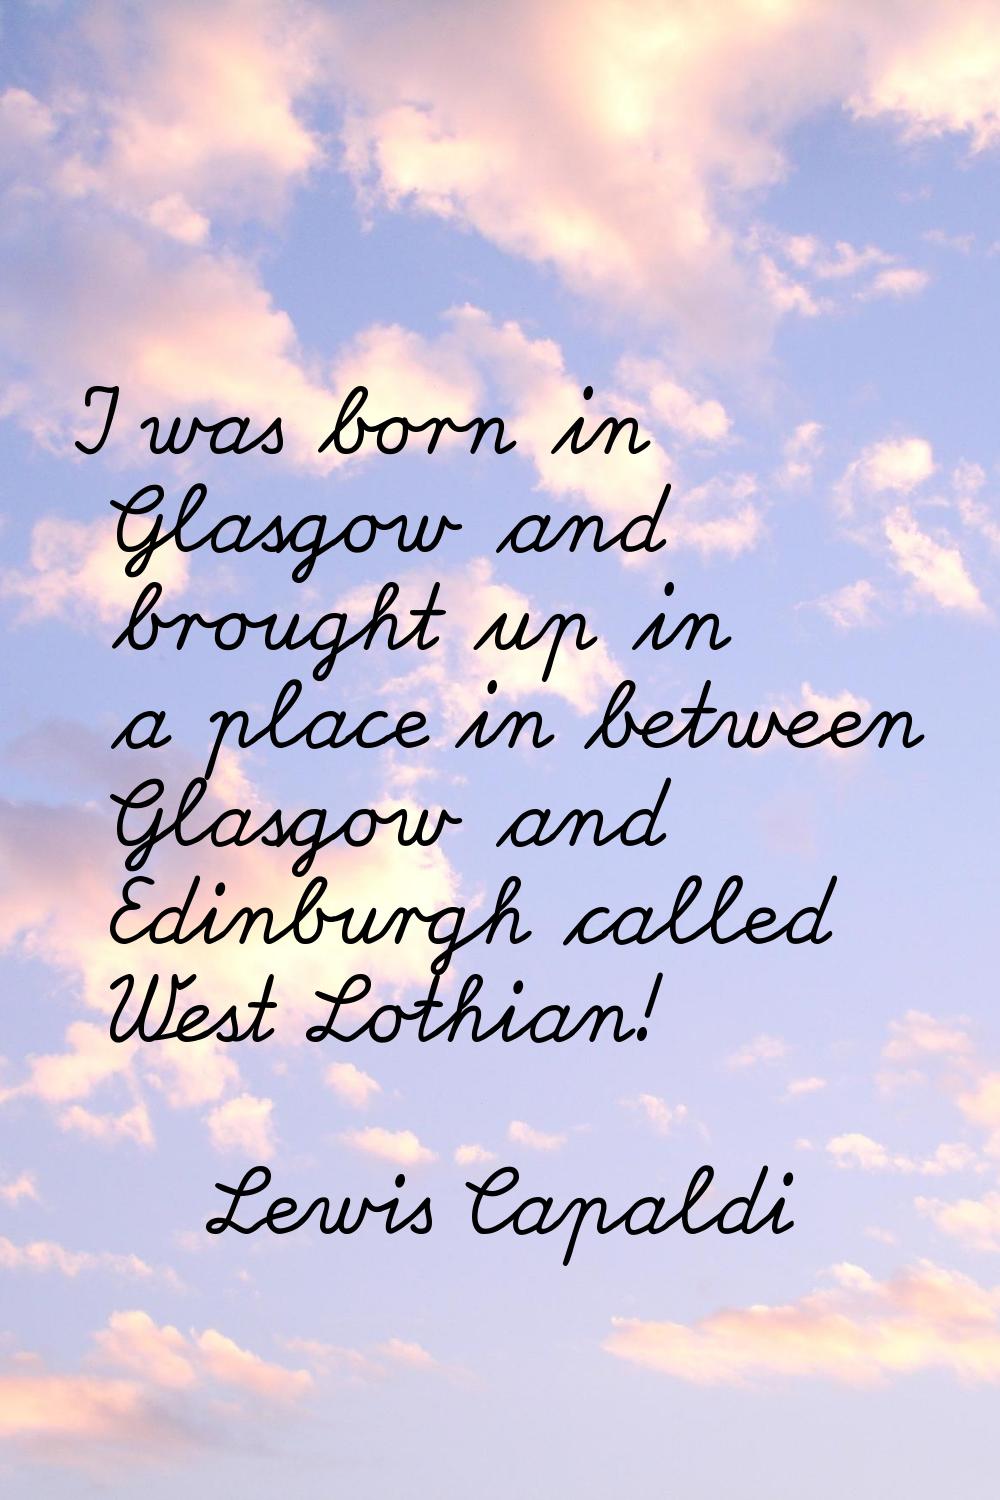 I was born in Glasgow and brought up in a place in between Glasgow and Edinburgh called West Lothia